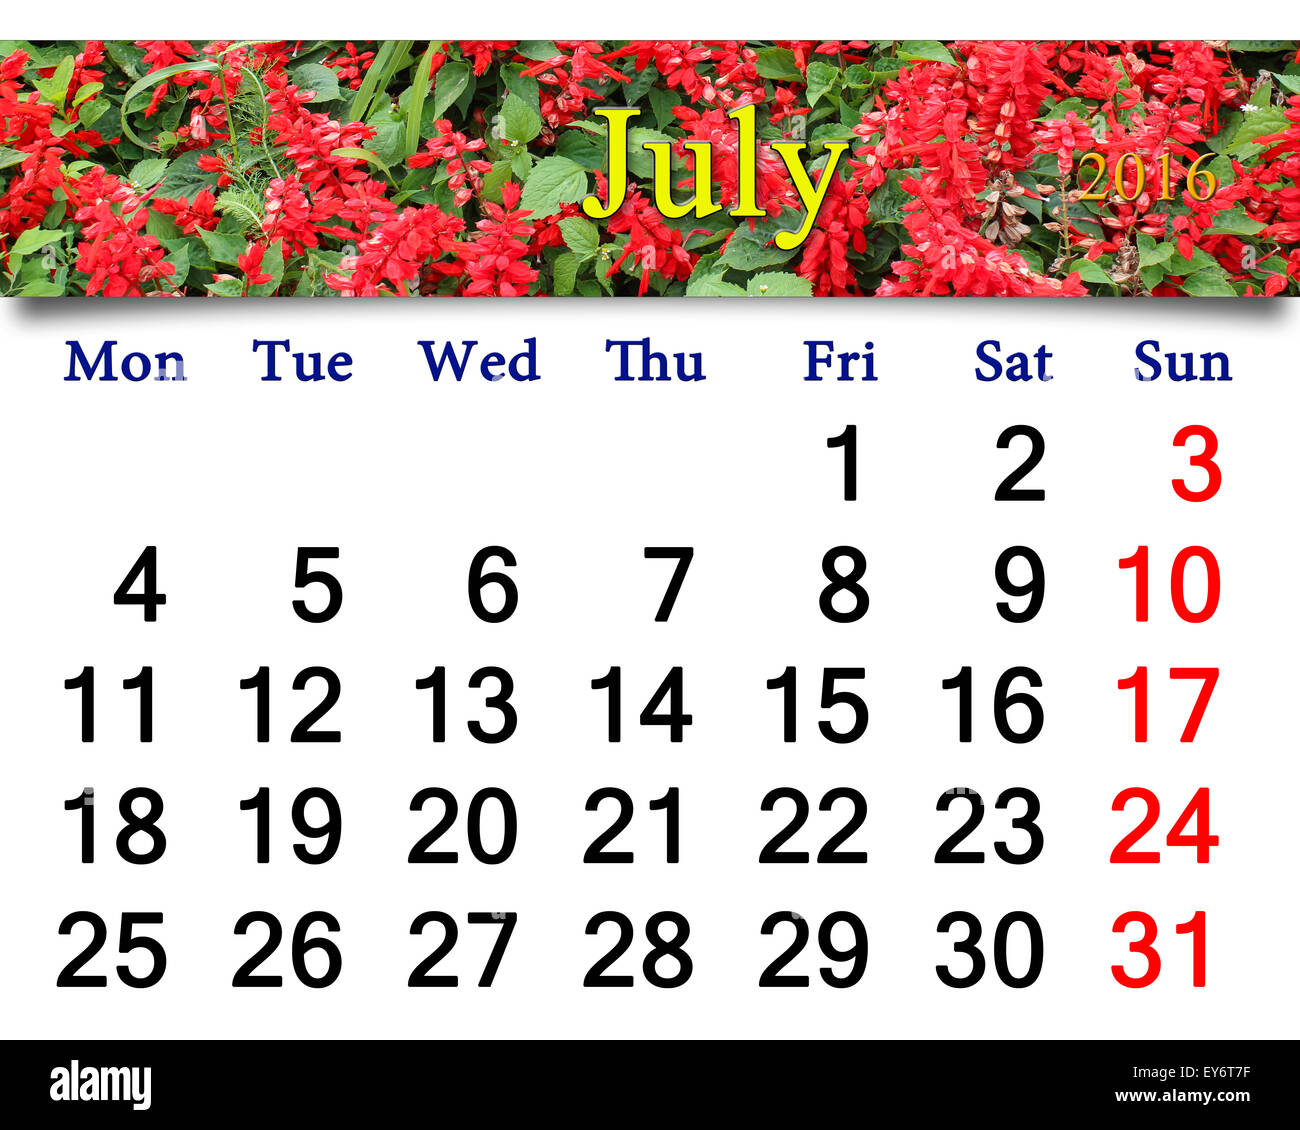 calendar for July 2016 with ribbon of red salvia Stock Photo